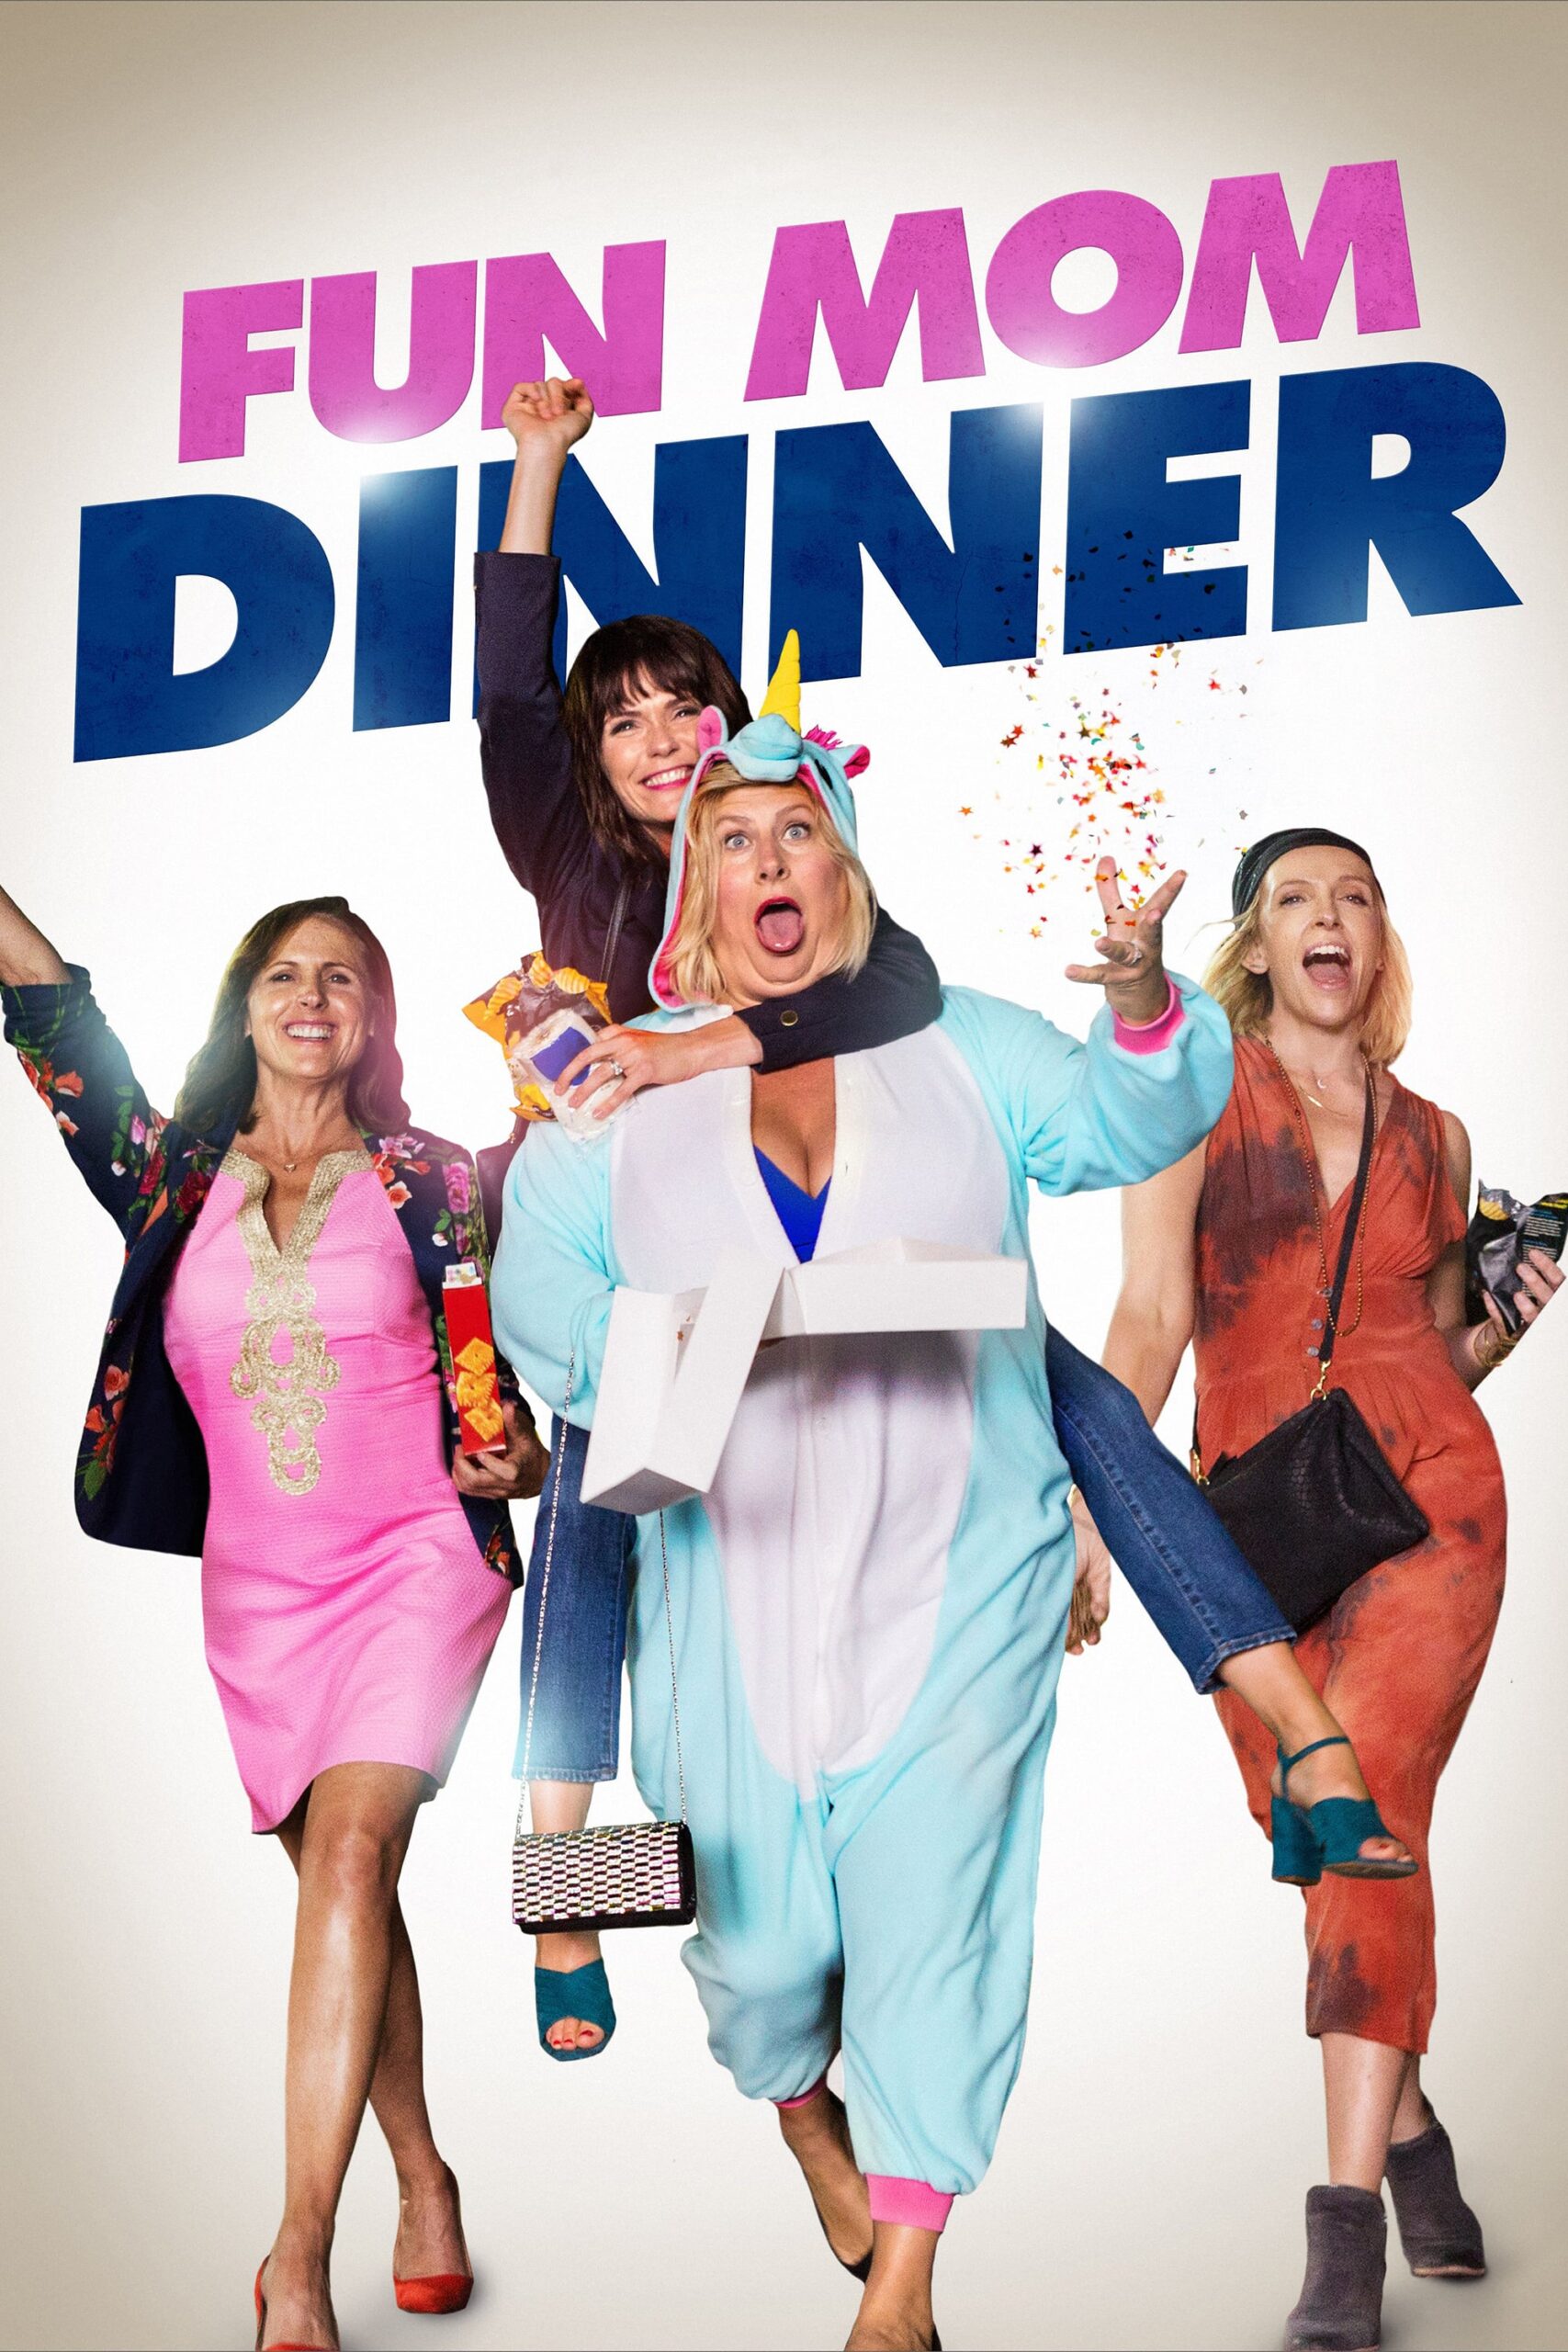 Poster for the movie "Fun Mom Dinner"